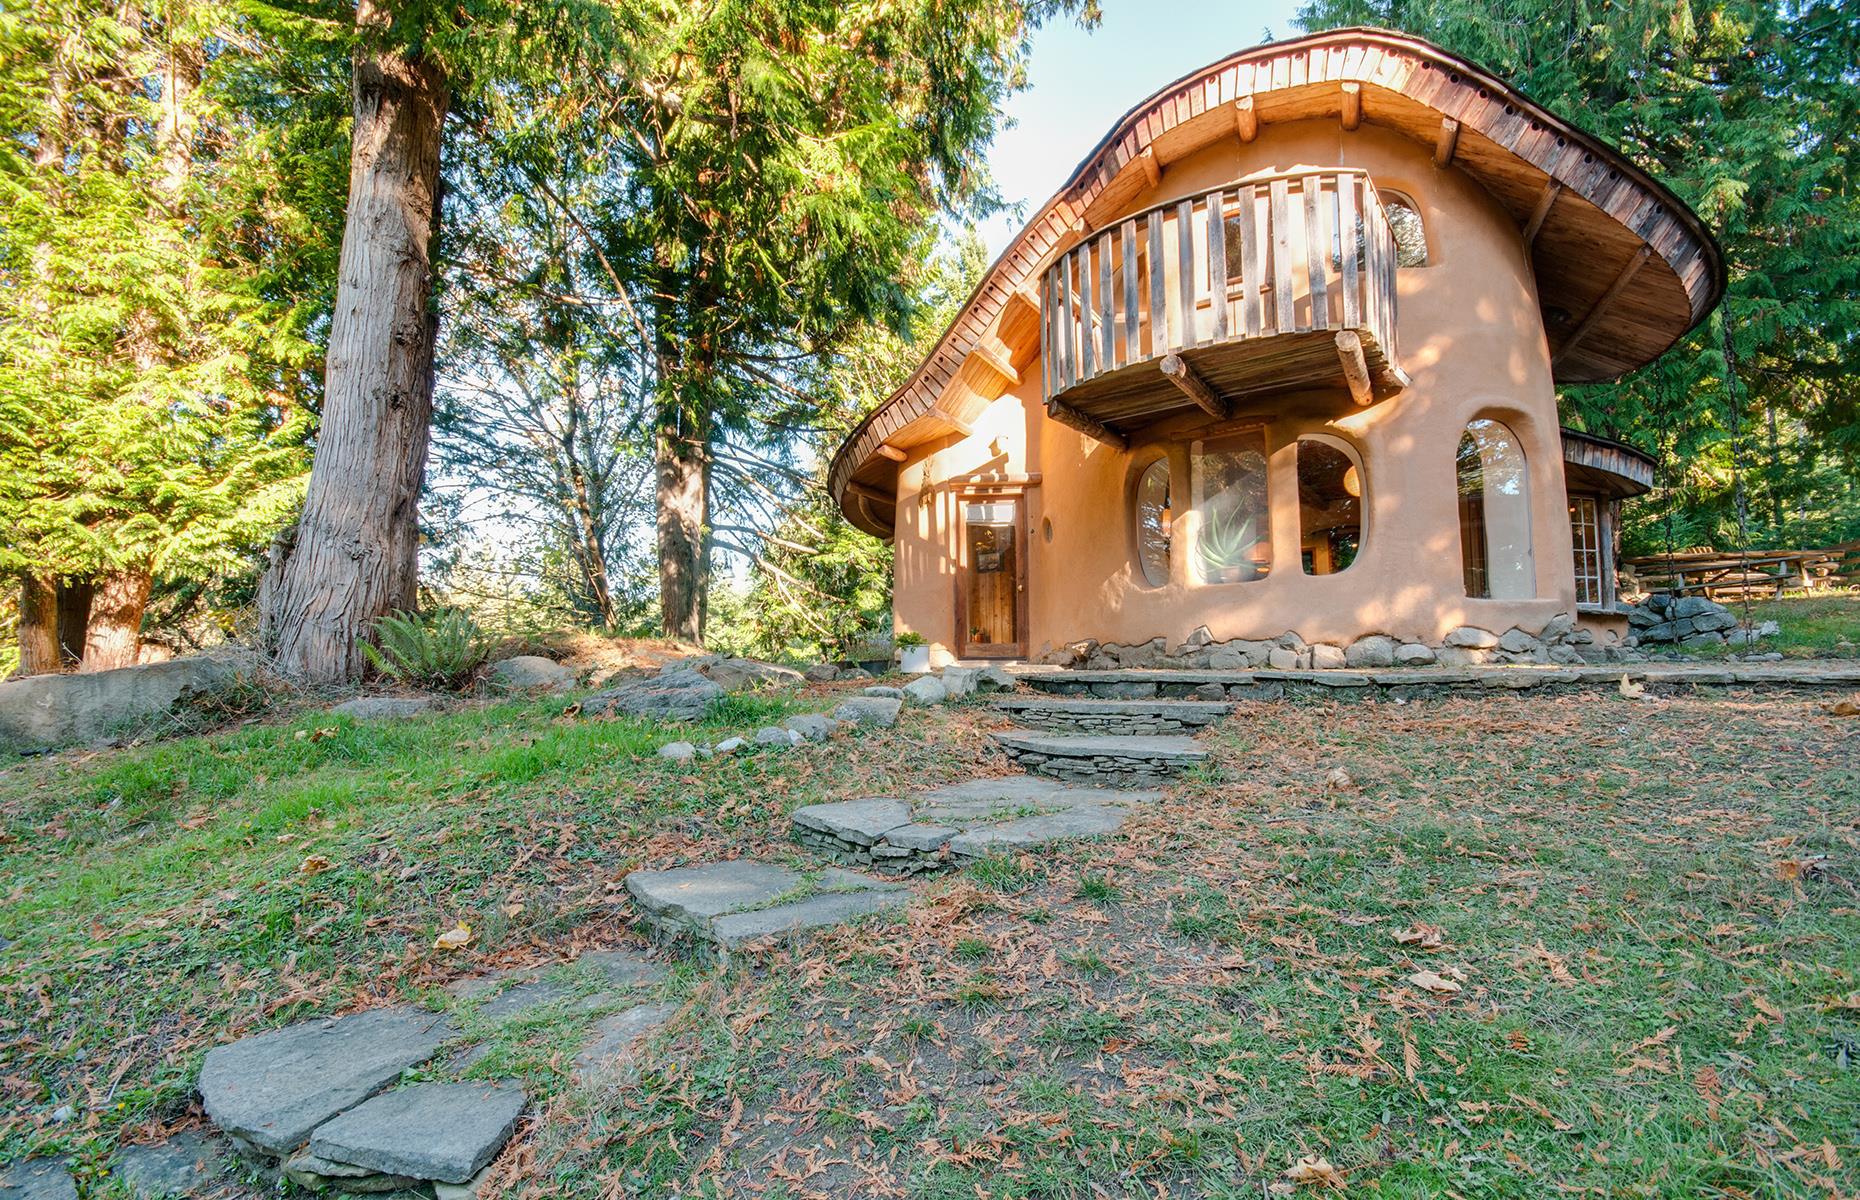 <p><a href="https://www.airbnb.co.uk/rooms/plus/1720832">This cozy cottage's</a> undulating roof, wooden balcony and curved windows could come straight from a fairy tale. The property is hand-sculpted from natural materials and surrounded by orchards with grazing sheep. Inside, it’s every bit as charming with stone floors, a wood-burning stove and wood-clad bedroom. </p>